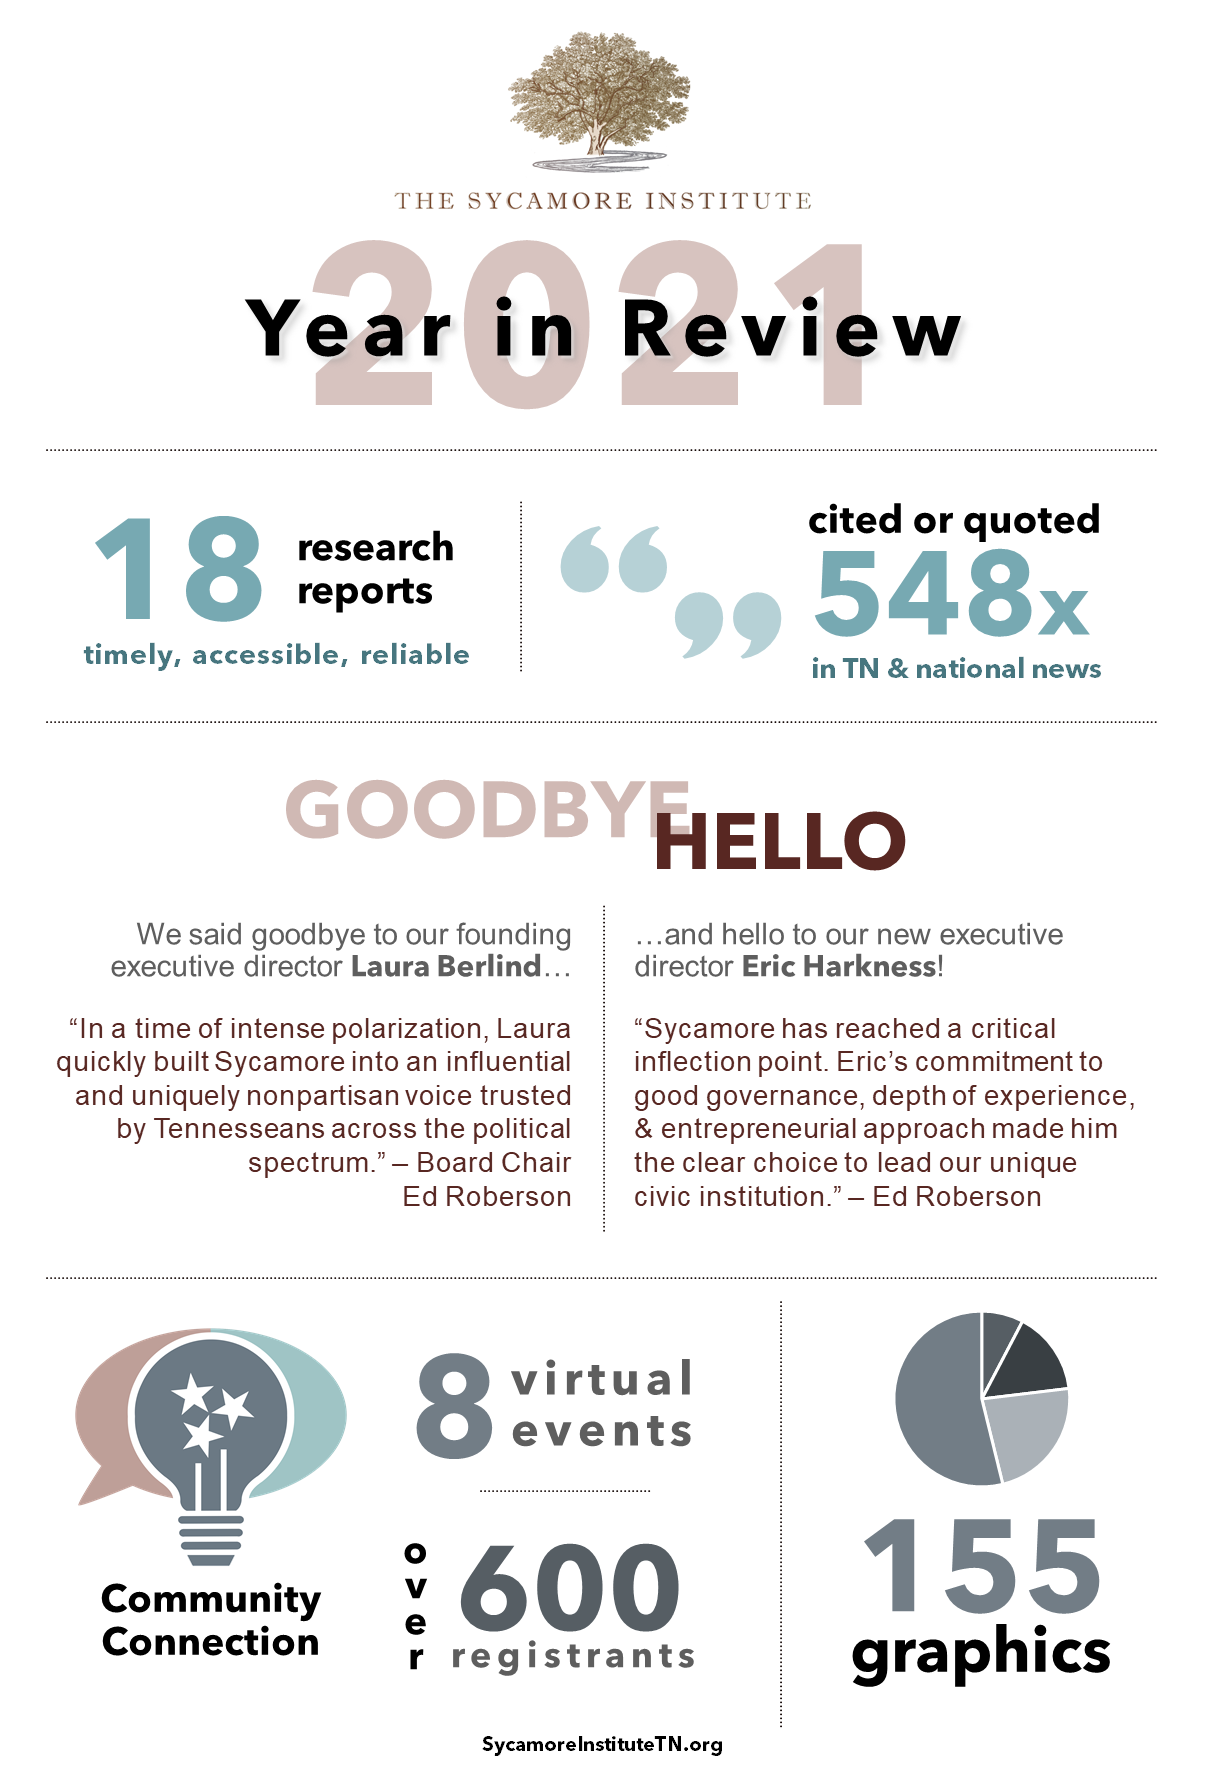 The Sycamore Institute's 2021 Year in Review infographic